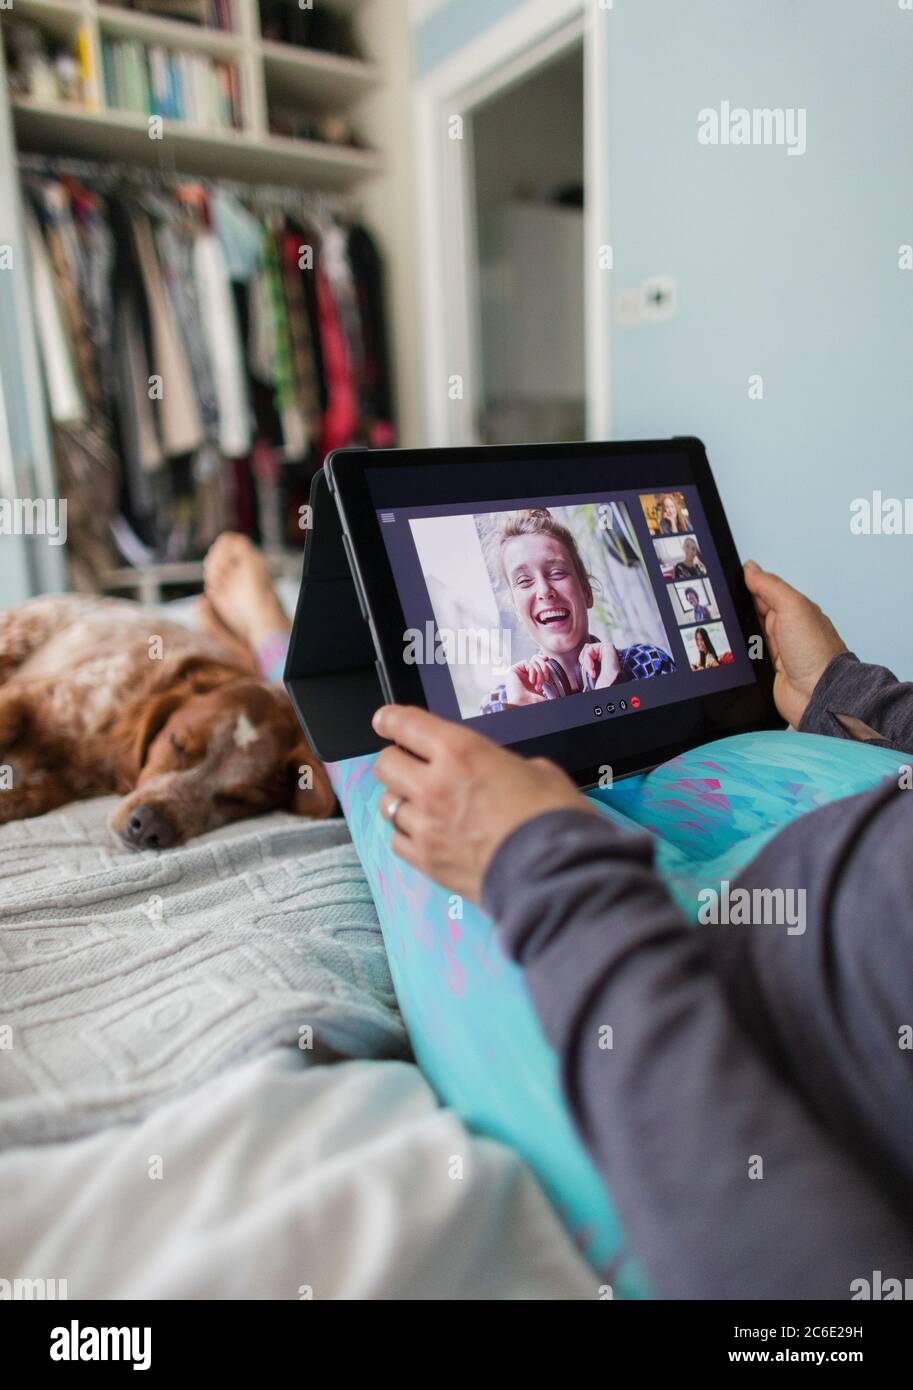 Woman with digital tablet video chatting with friends on bed with dog Stock Photo